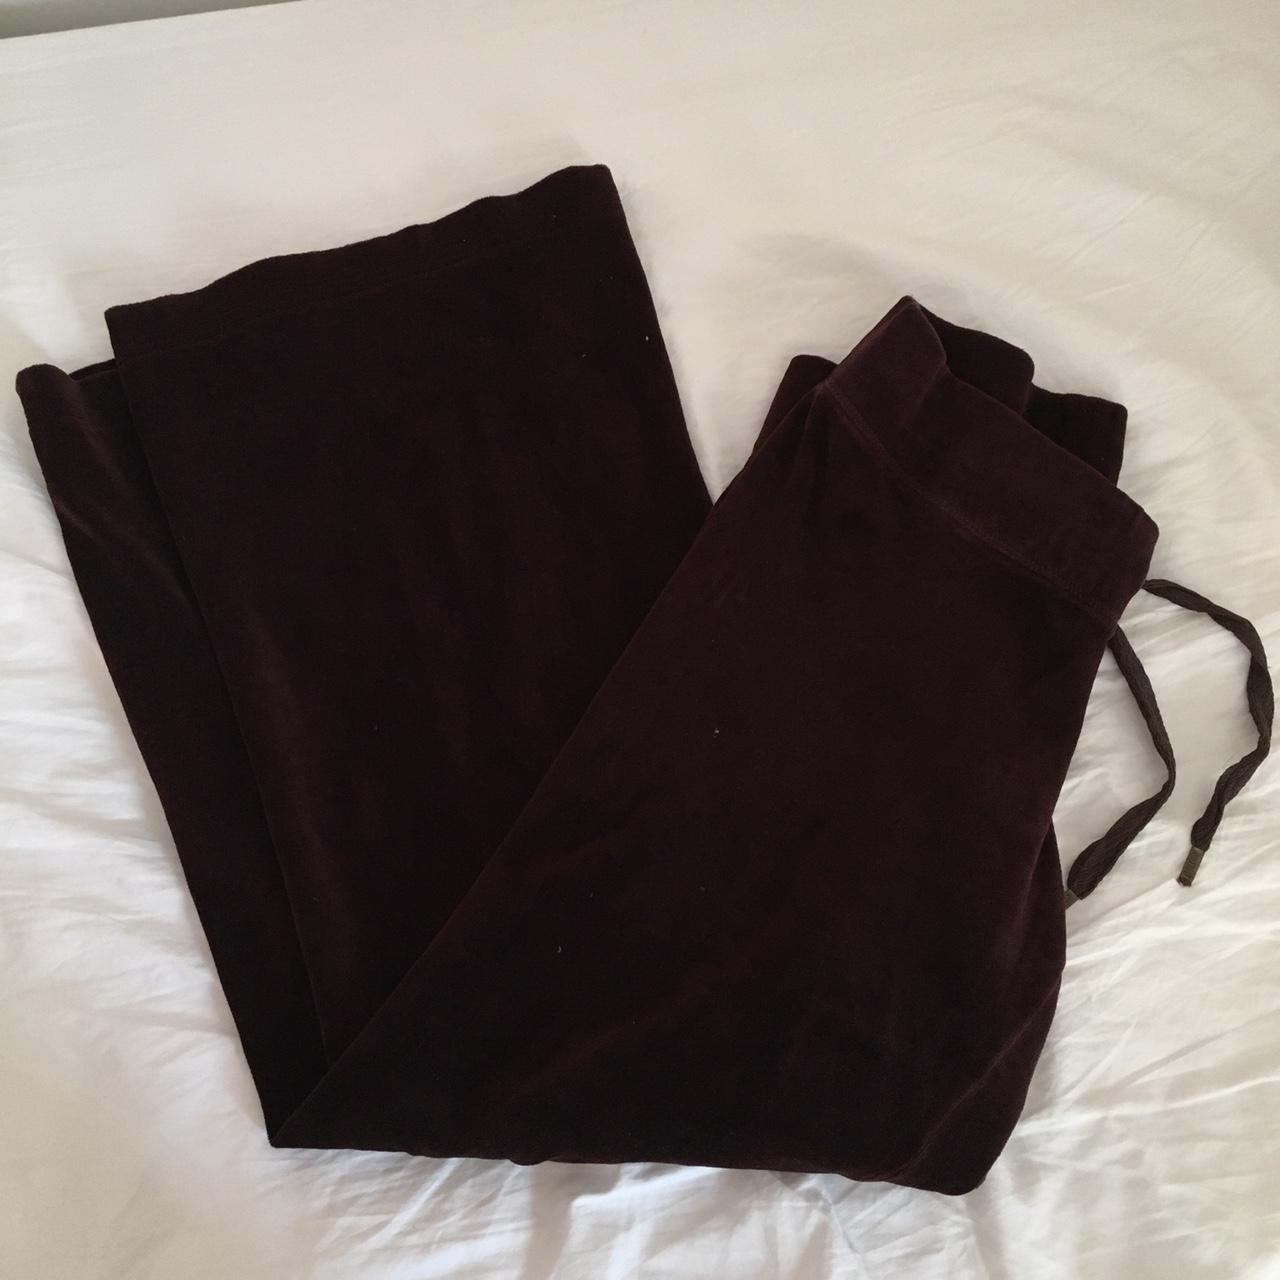 Juicy Couture Women's Brown Joggers-tracksuits | Depop